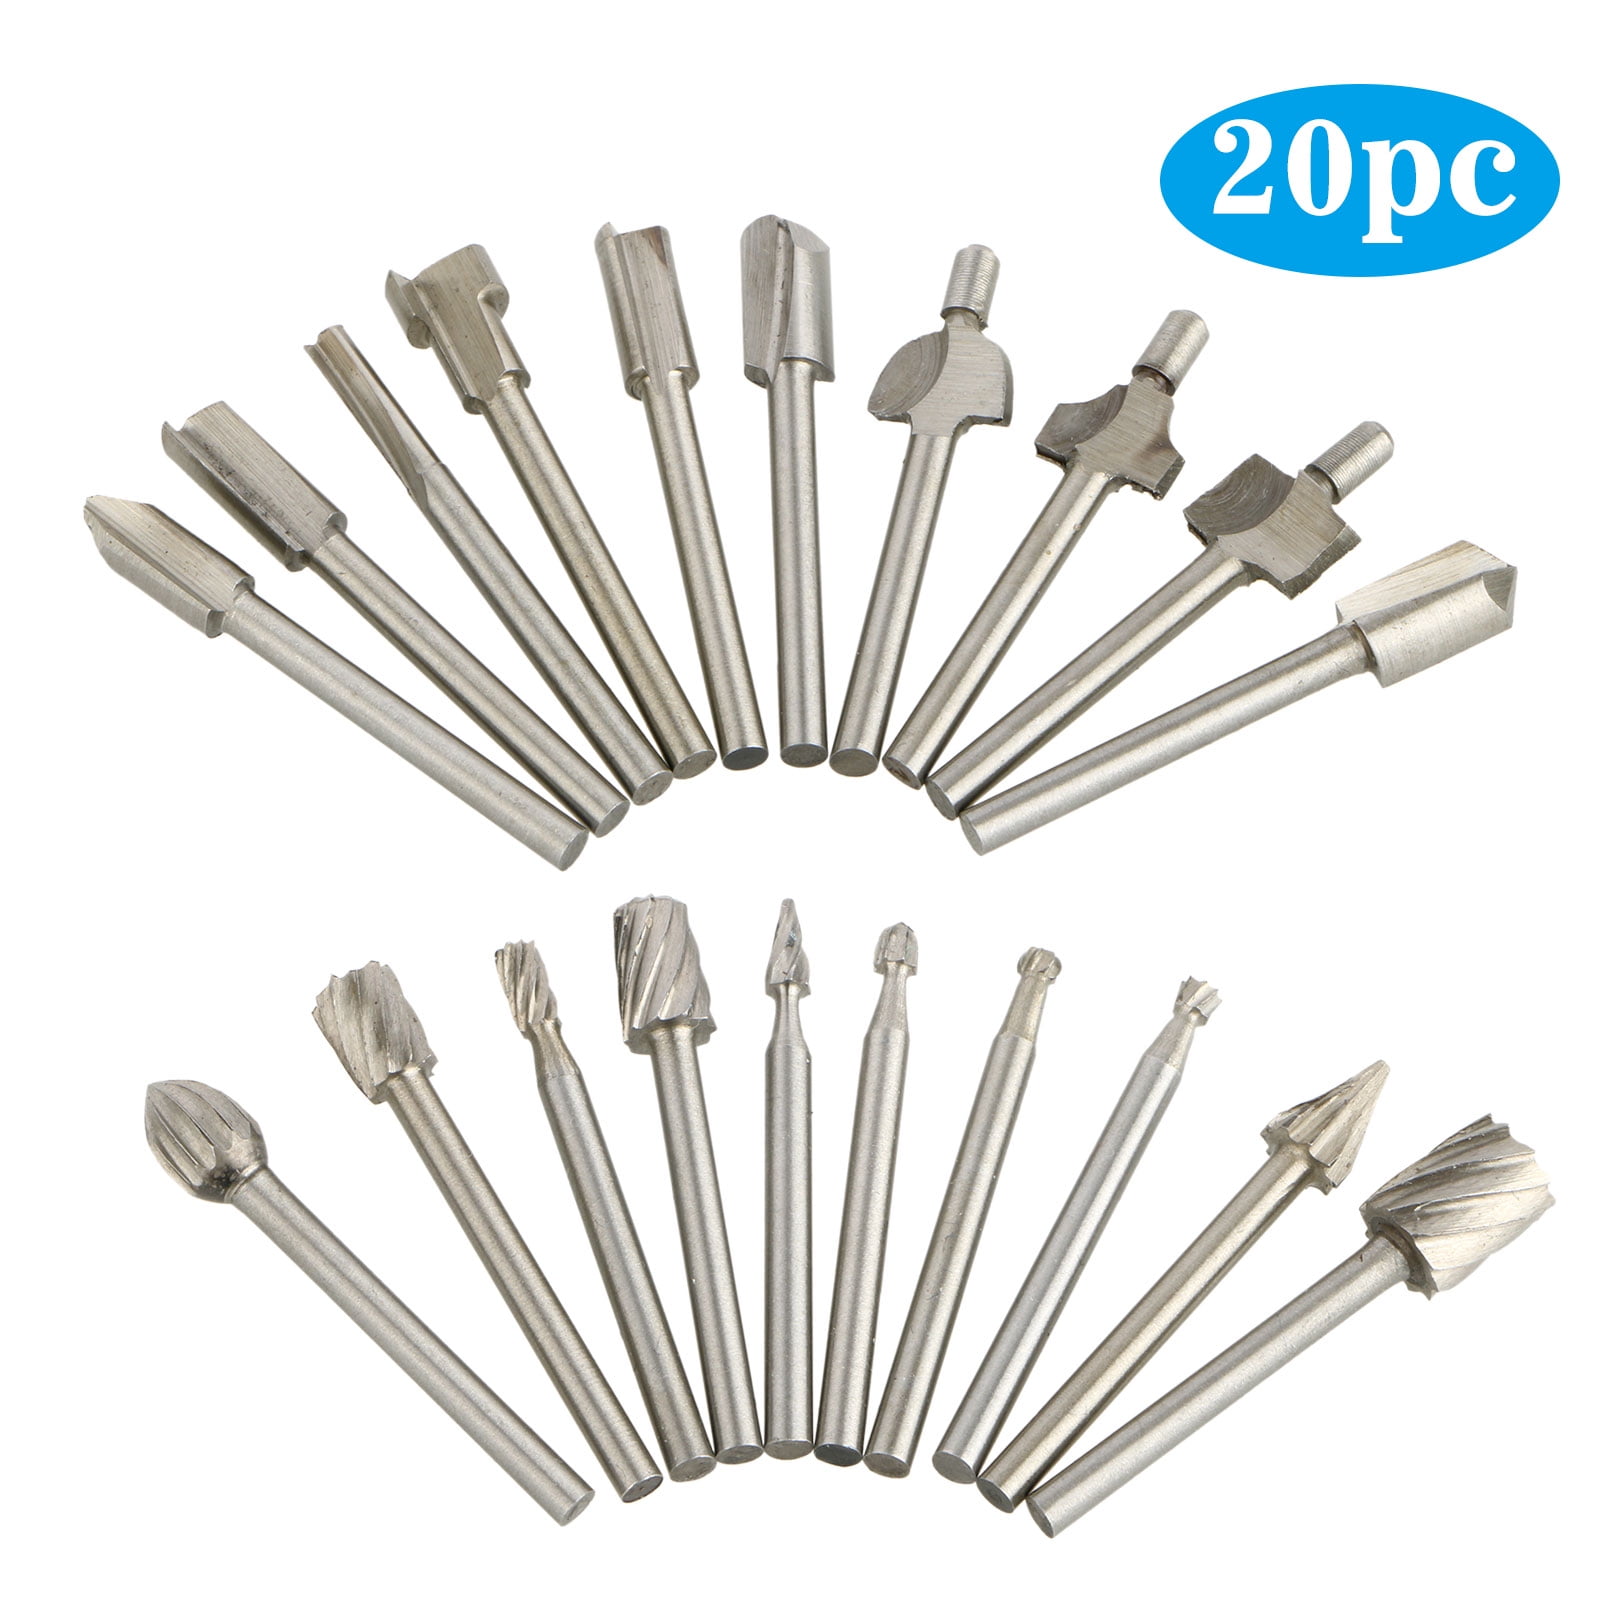 10pc Tungsten Carbide Cutting Burr Set Drill Bits rotary grinder grinding STOCK 